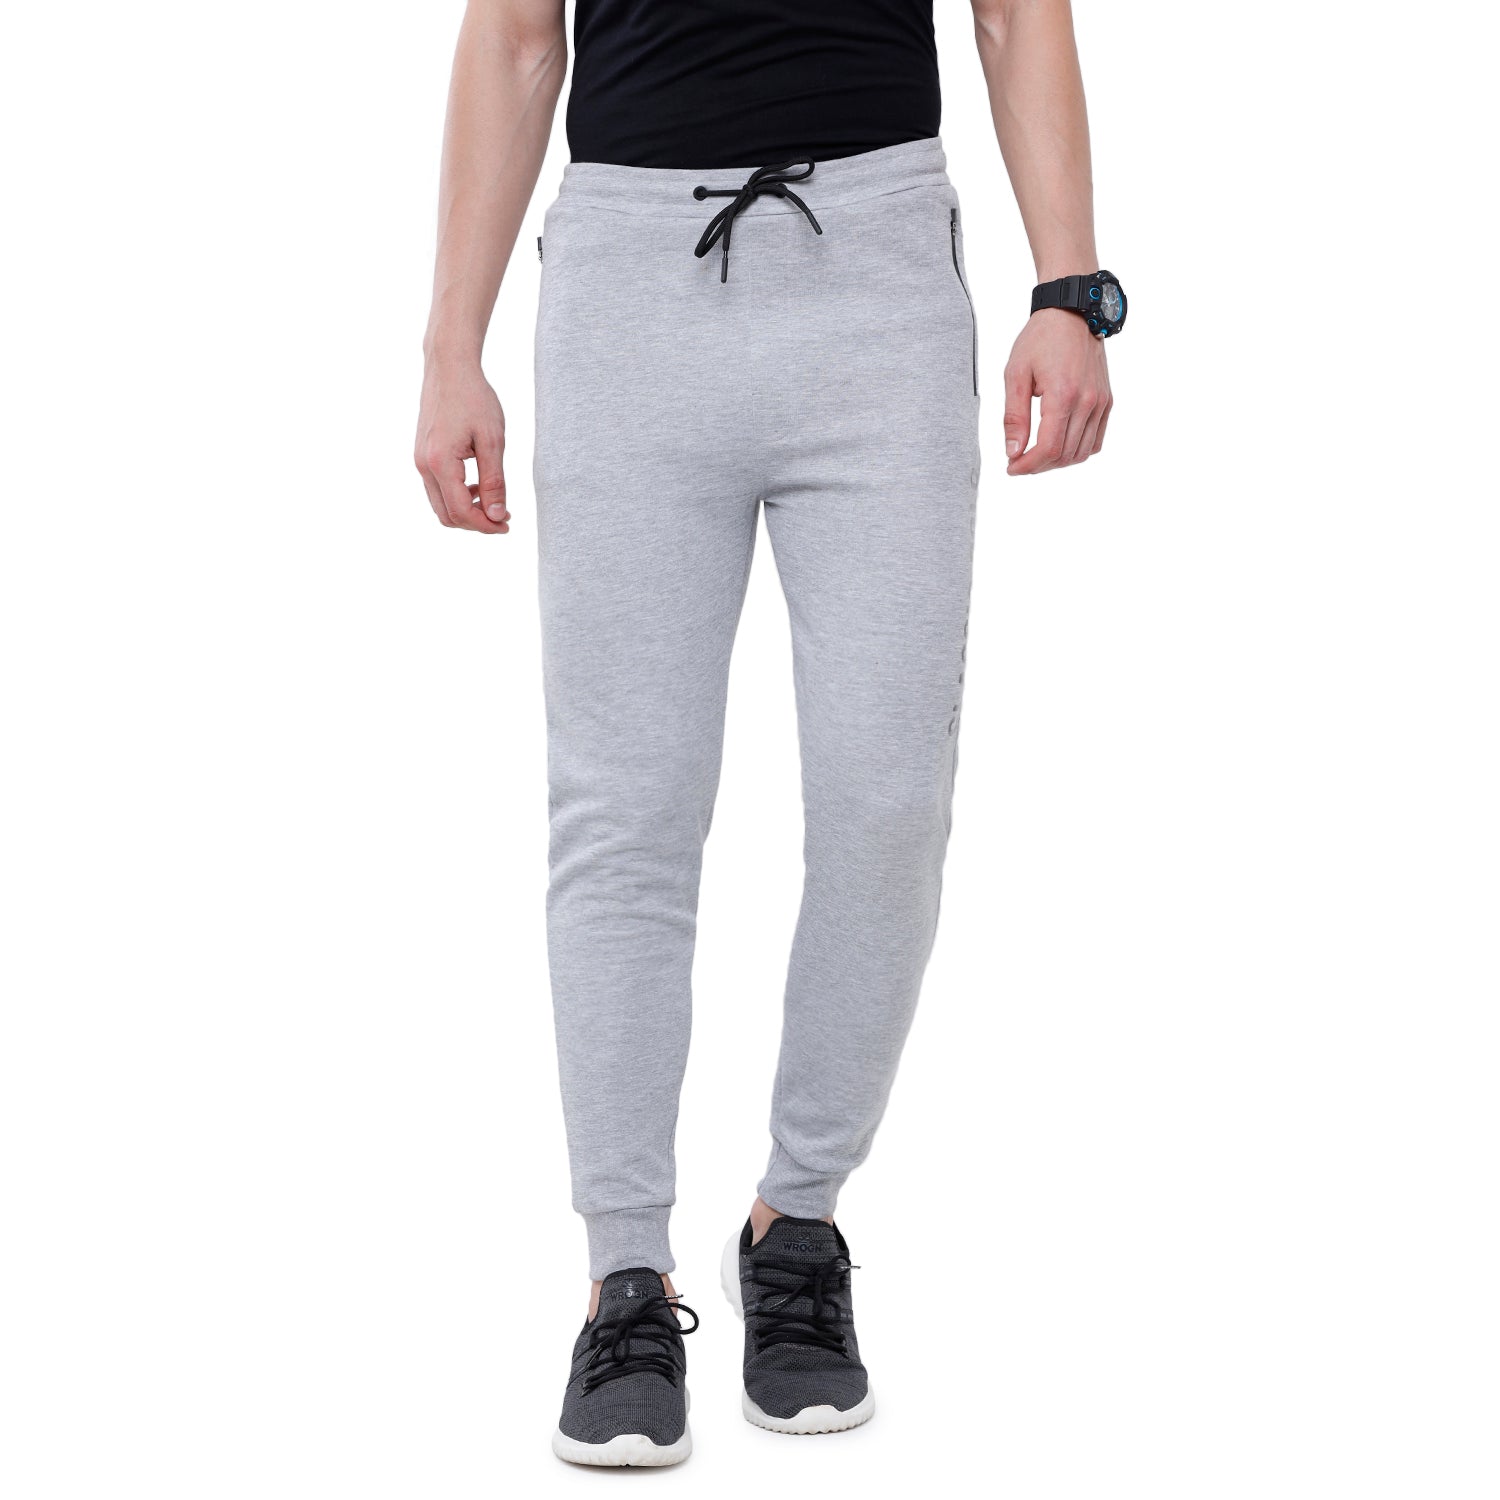 Classic Polo Men's White Solid Mélange Slim Fit Trendy Jogger Pant - Gioz-02 C Track Pants Classic Polo 